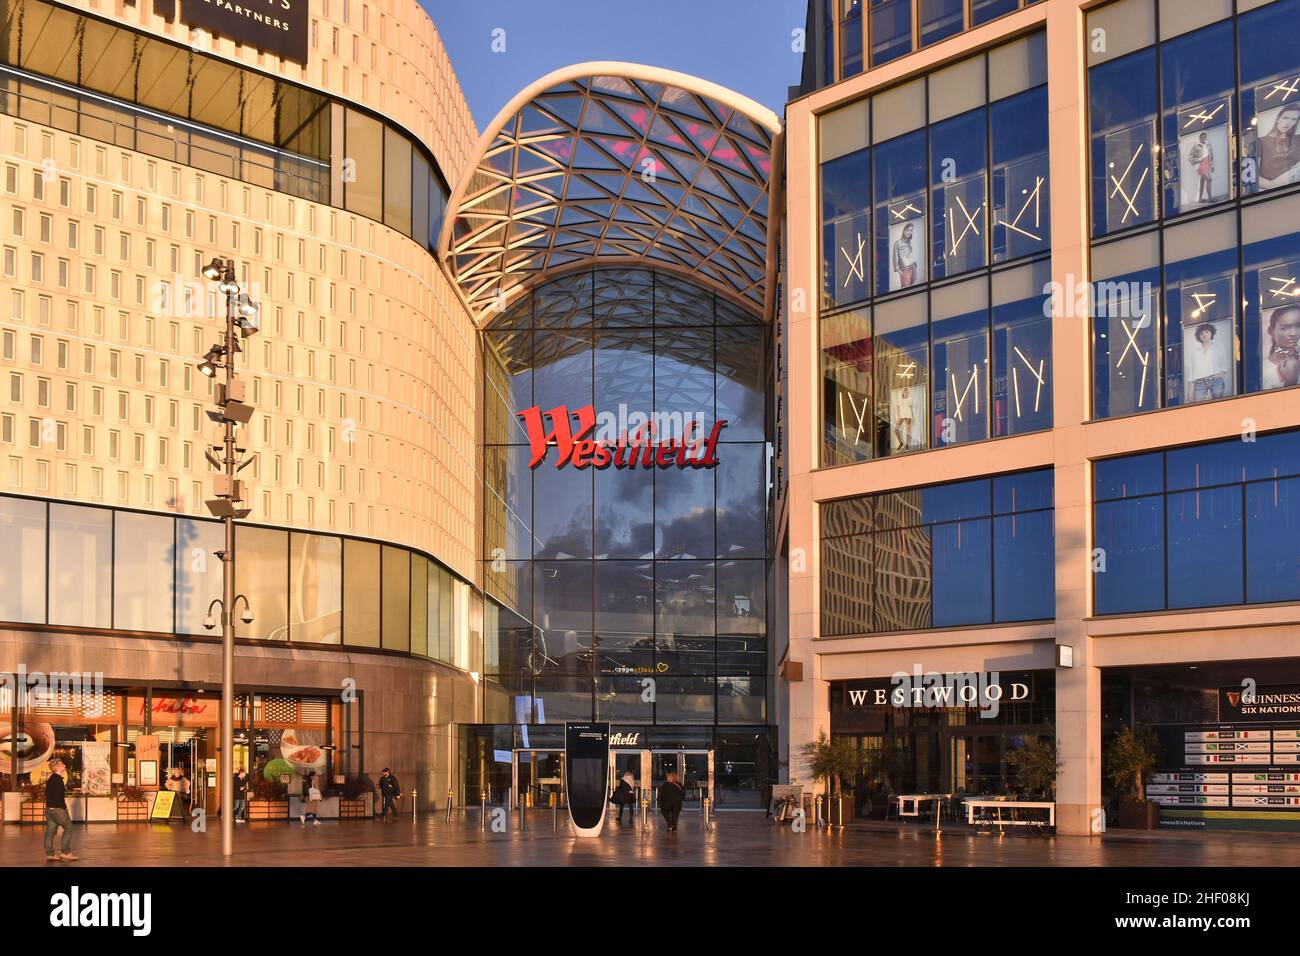 Six European shopping centres to rebrand as Westfield